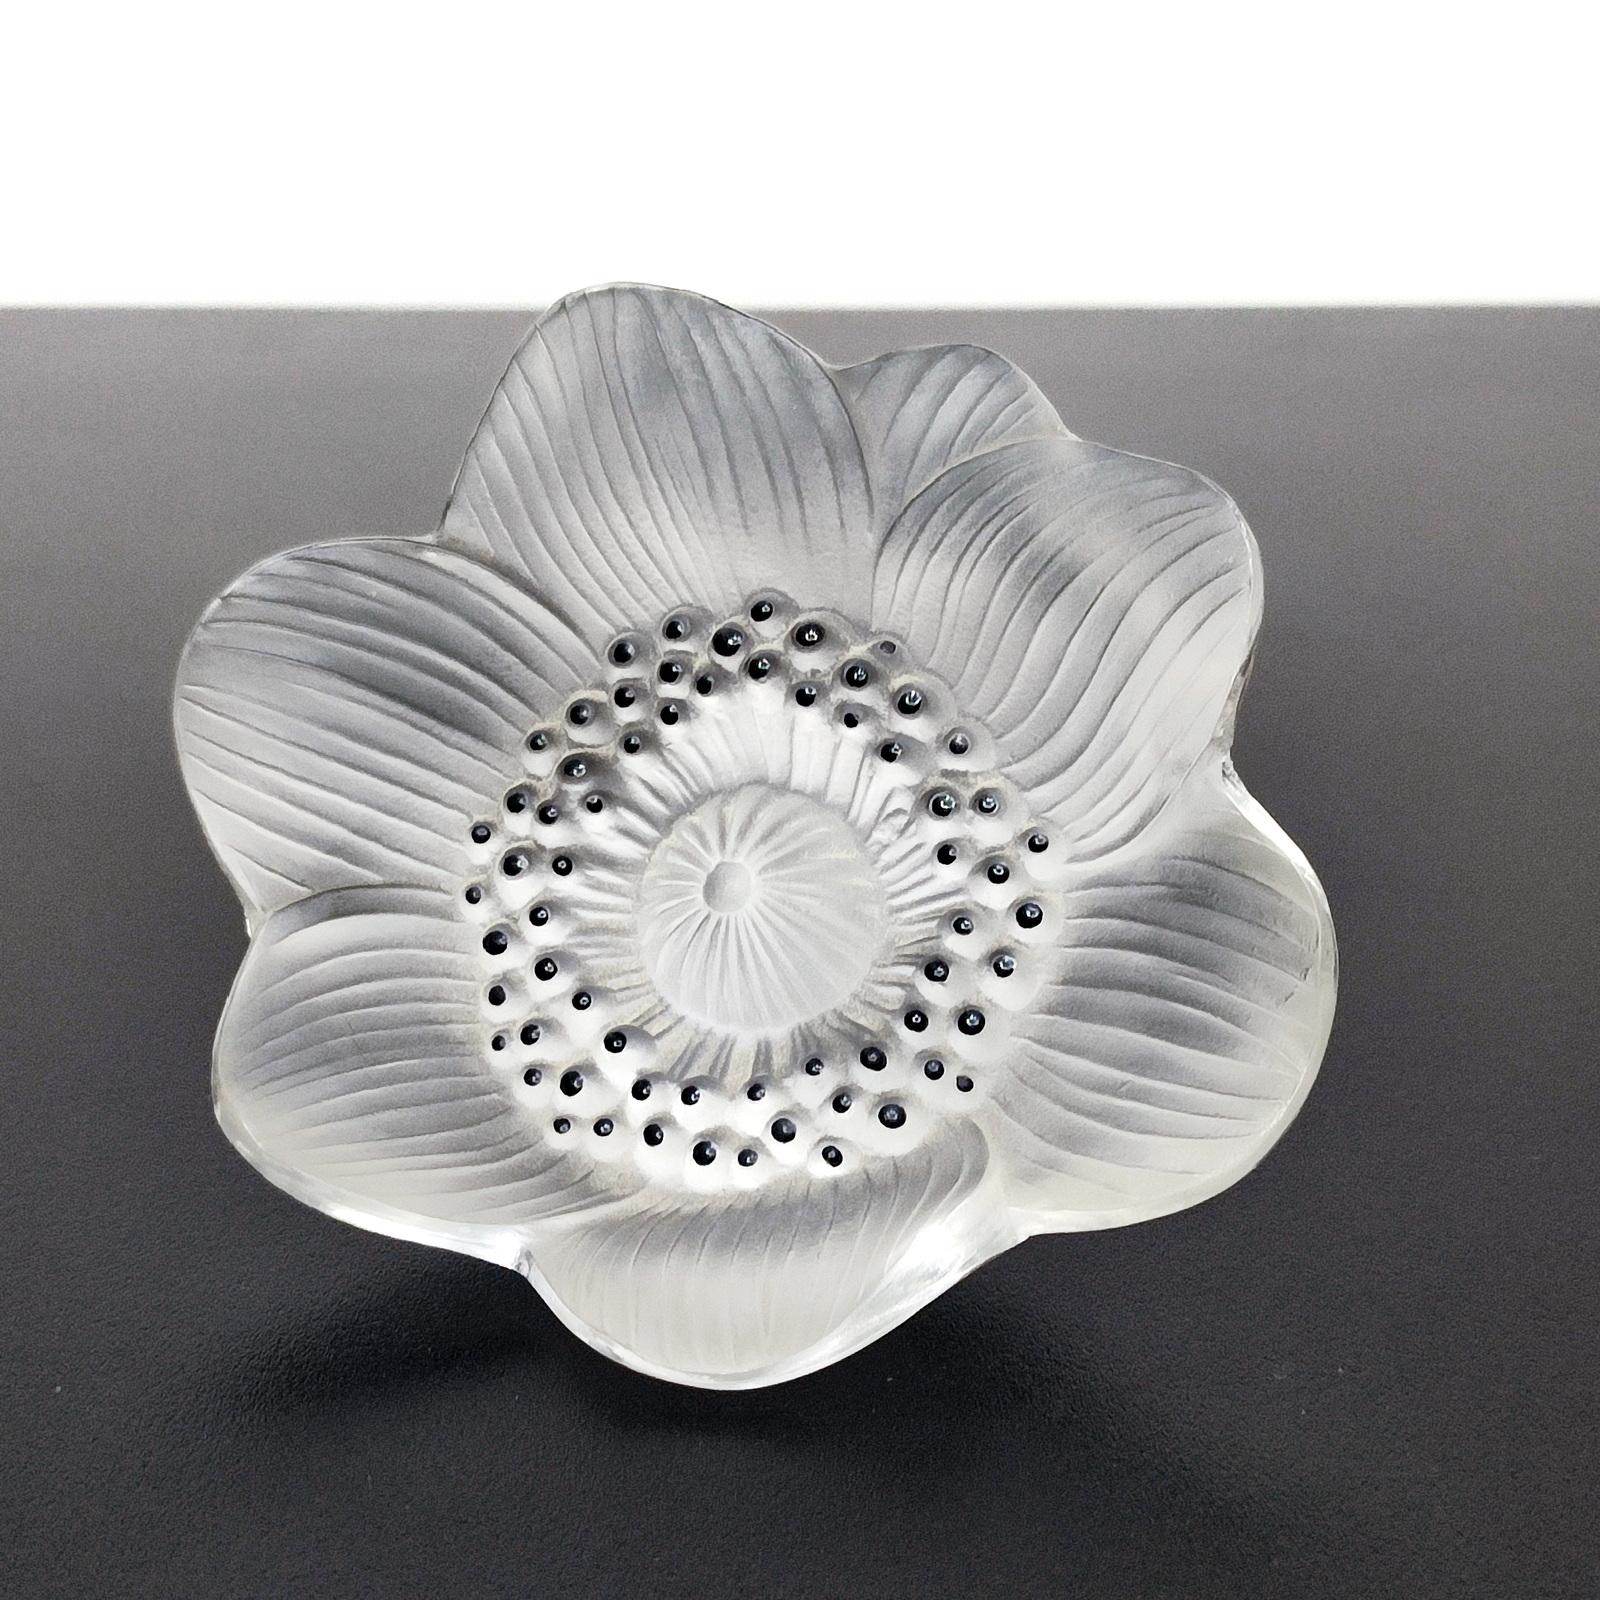 Hand-Crafted Lalique France Vintage Anemone Flower Sculpture, Paperweight - FREE SHIPPING For Sale